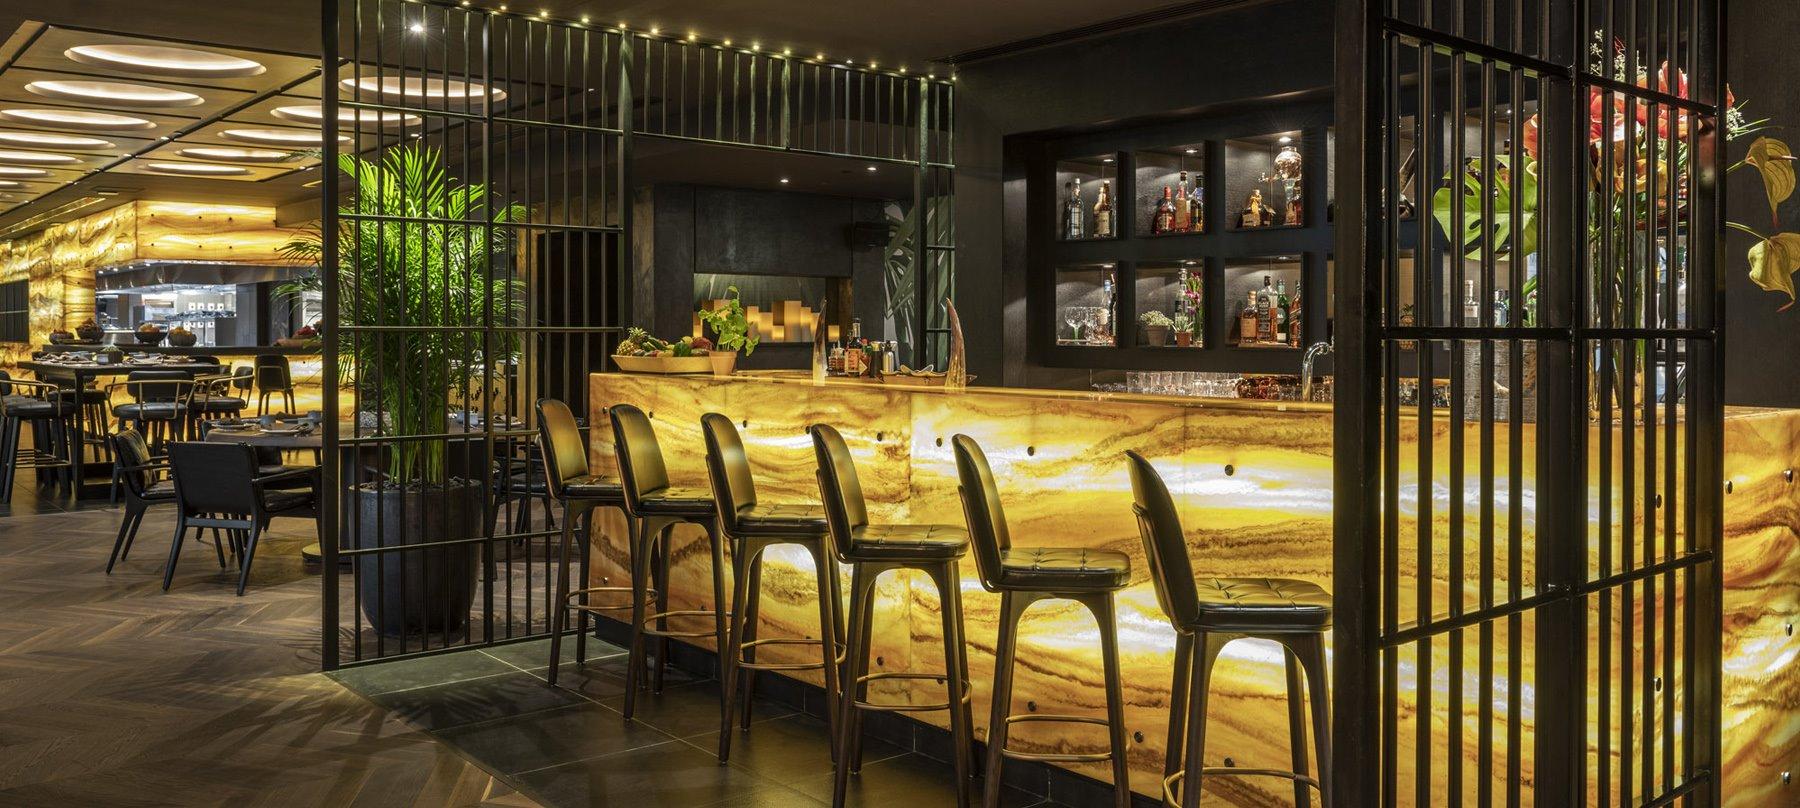 TORO TORO - HOW TO DINE AND PARTY AT THIS SOUTH AMERICAN RESTAURANT IN DUBAI 